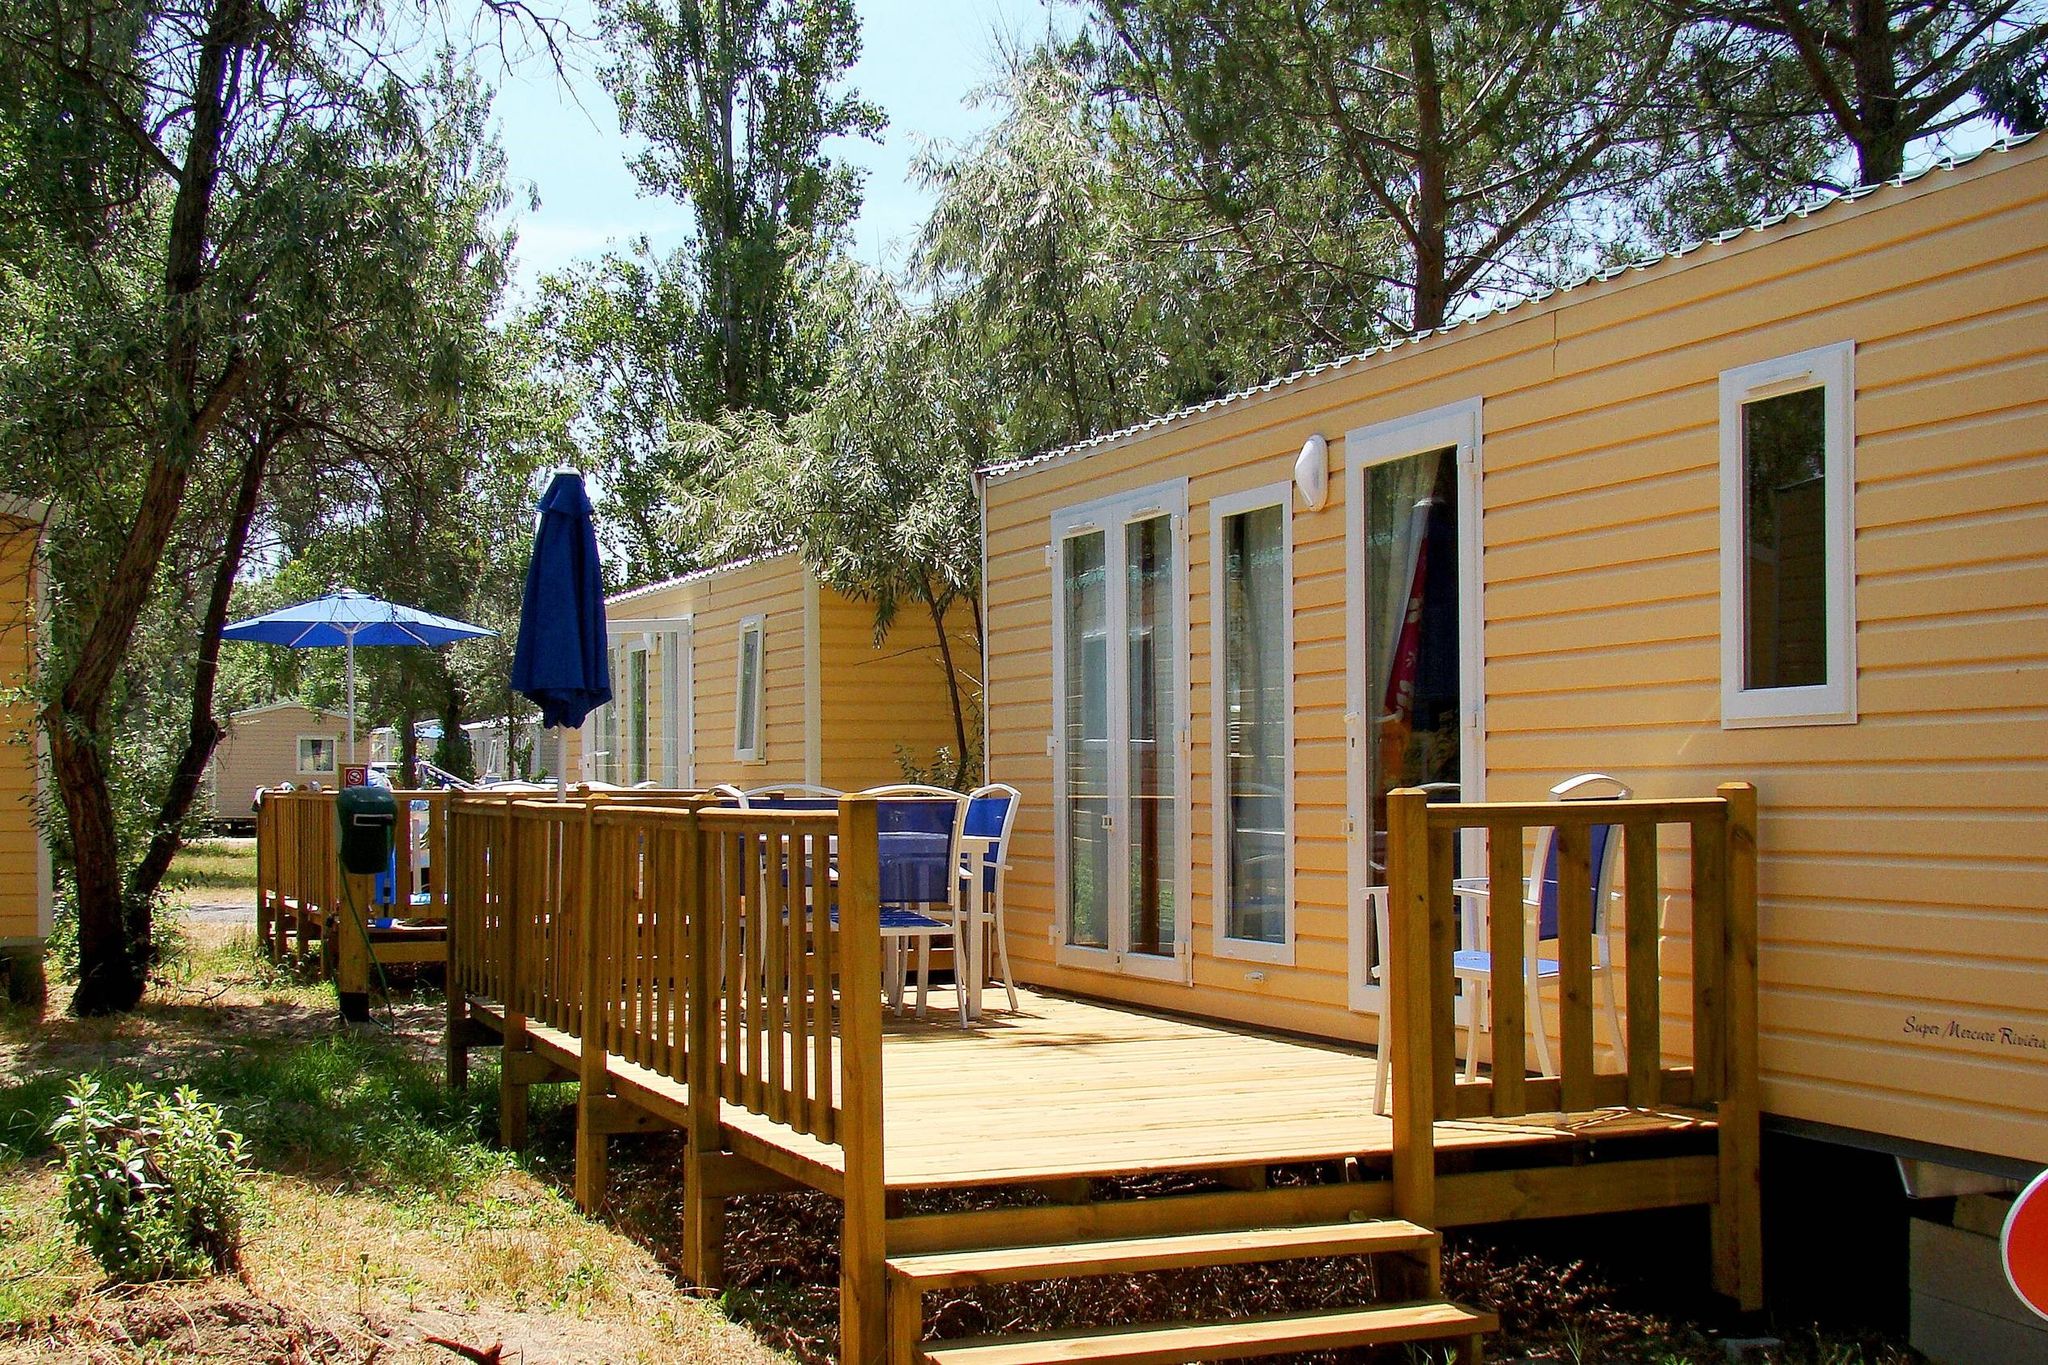 Quaint mobile home with AC in quaint, and green Camargue